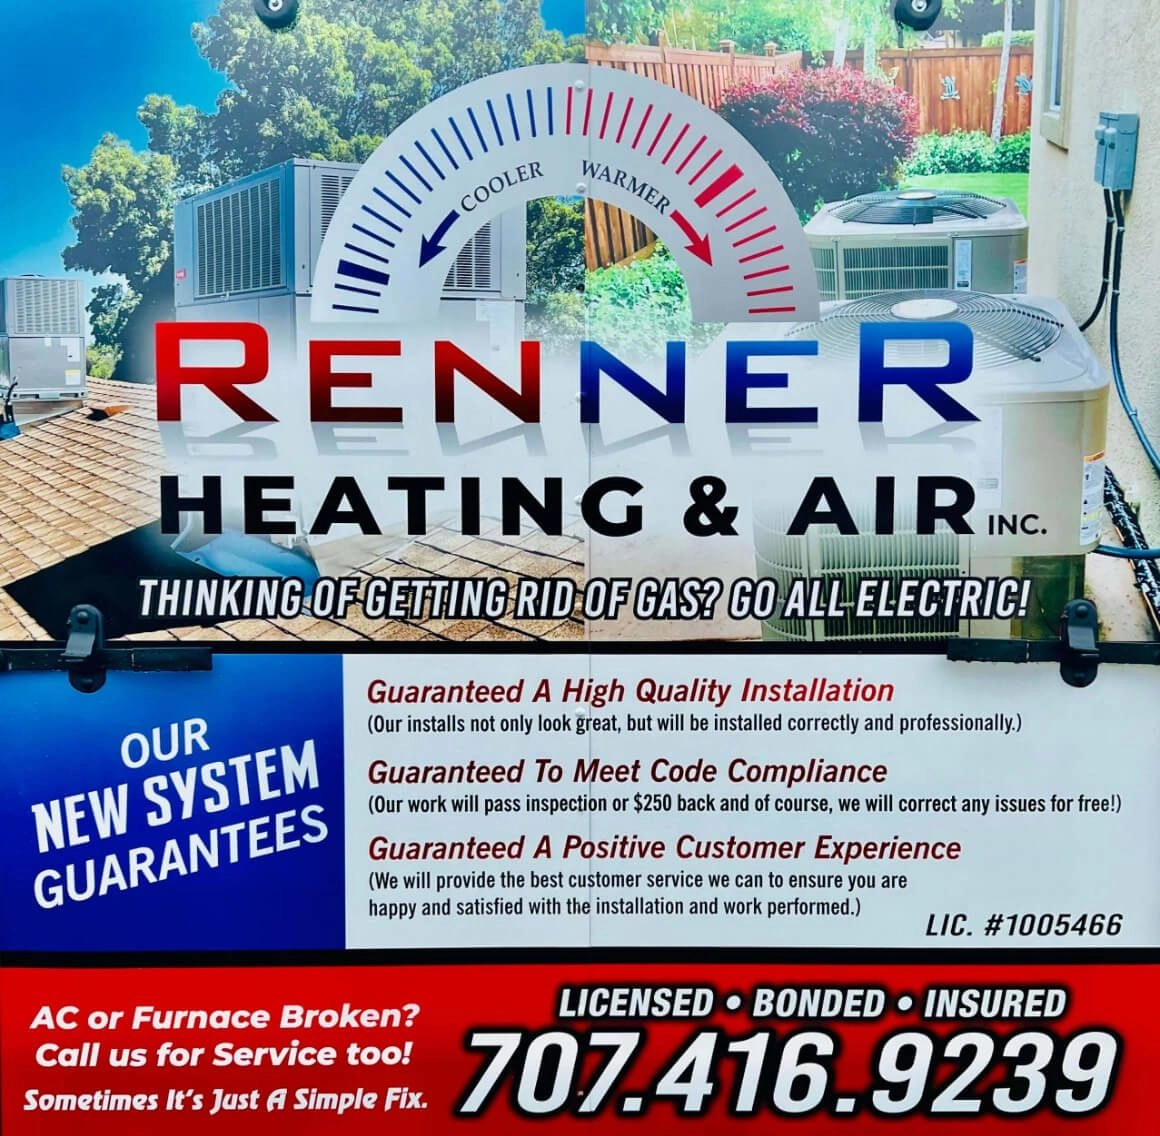 Renner Heating & Air Conditioning Logo